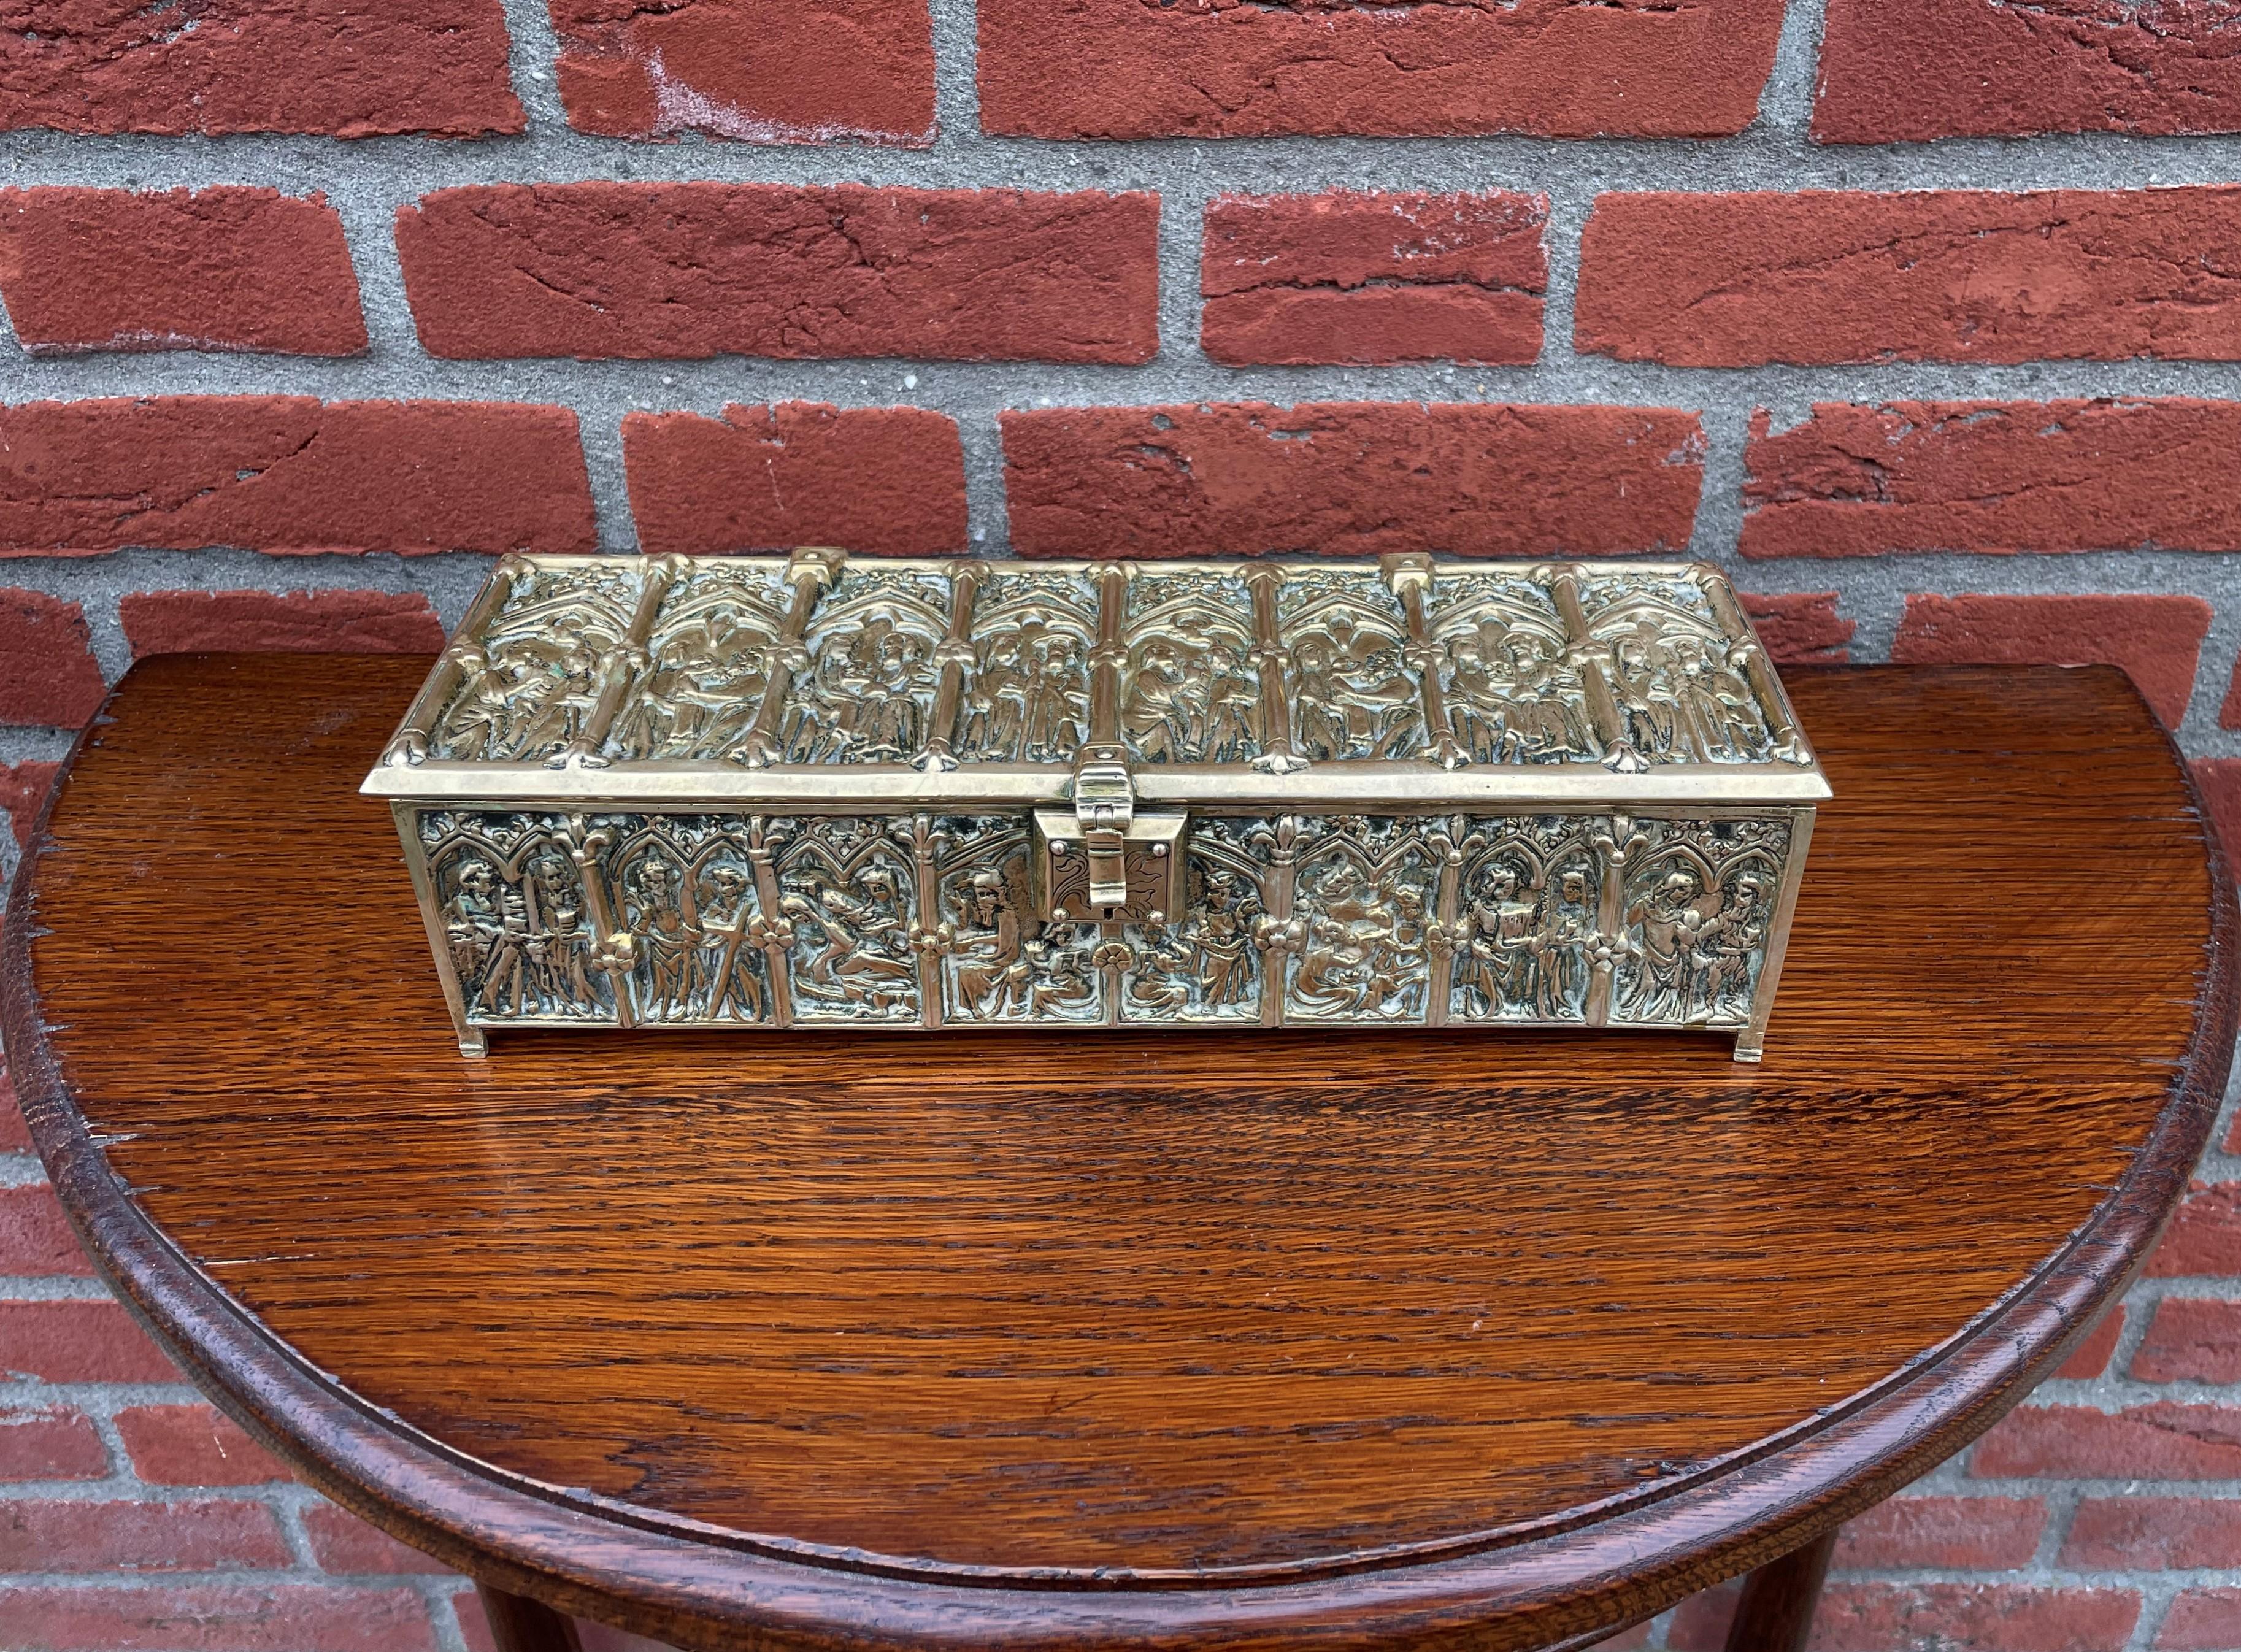 Rare size, solid bronze, Victorian Gothic box with multiple church window-like panels.
Over the years we have sold a number of rare and unique boxes, but never a Gothic Revival one of this length and looking like a medieval antiquity. Let us start